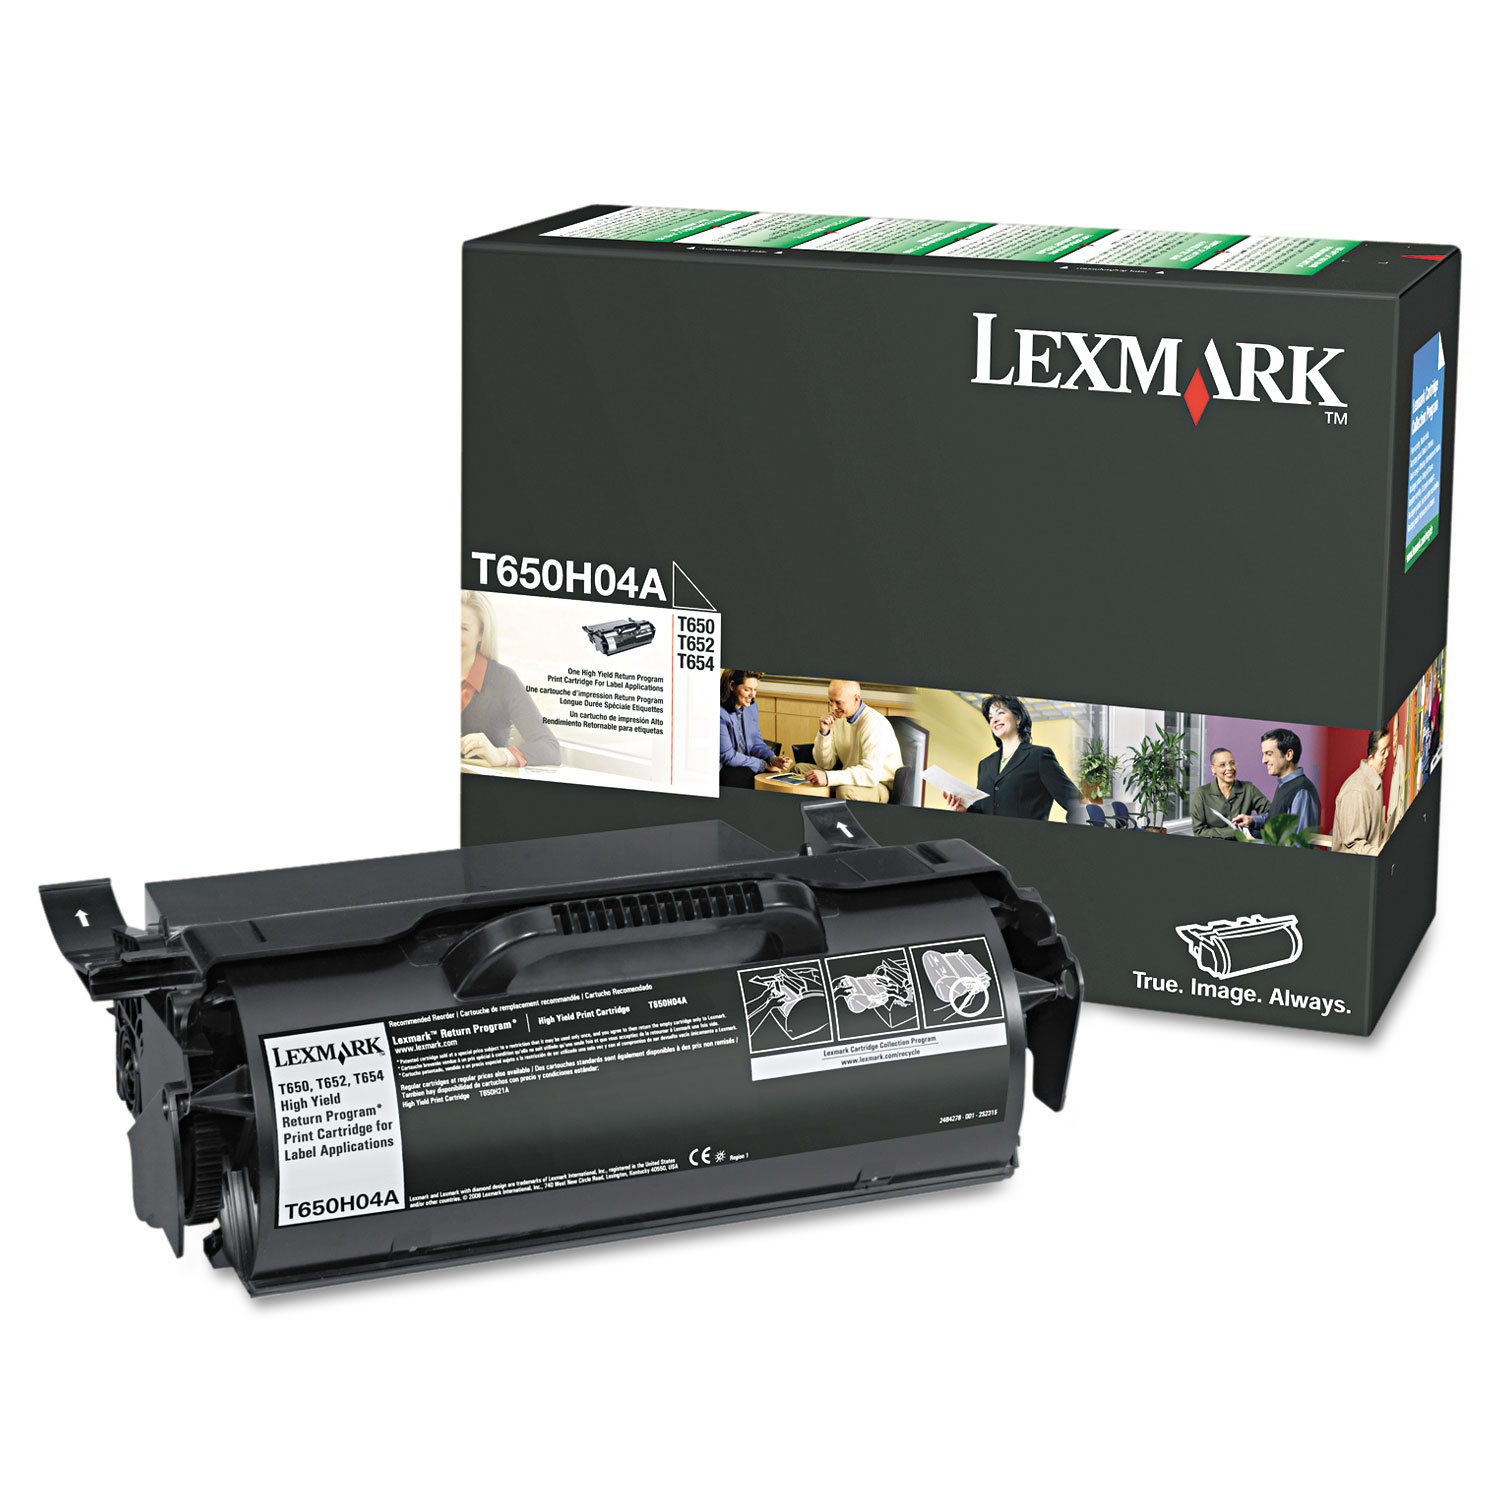 Lexmark LEXT650H04A T650H04A High-Yield Toner, 25000 Page-Yield, Black